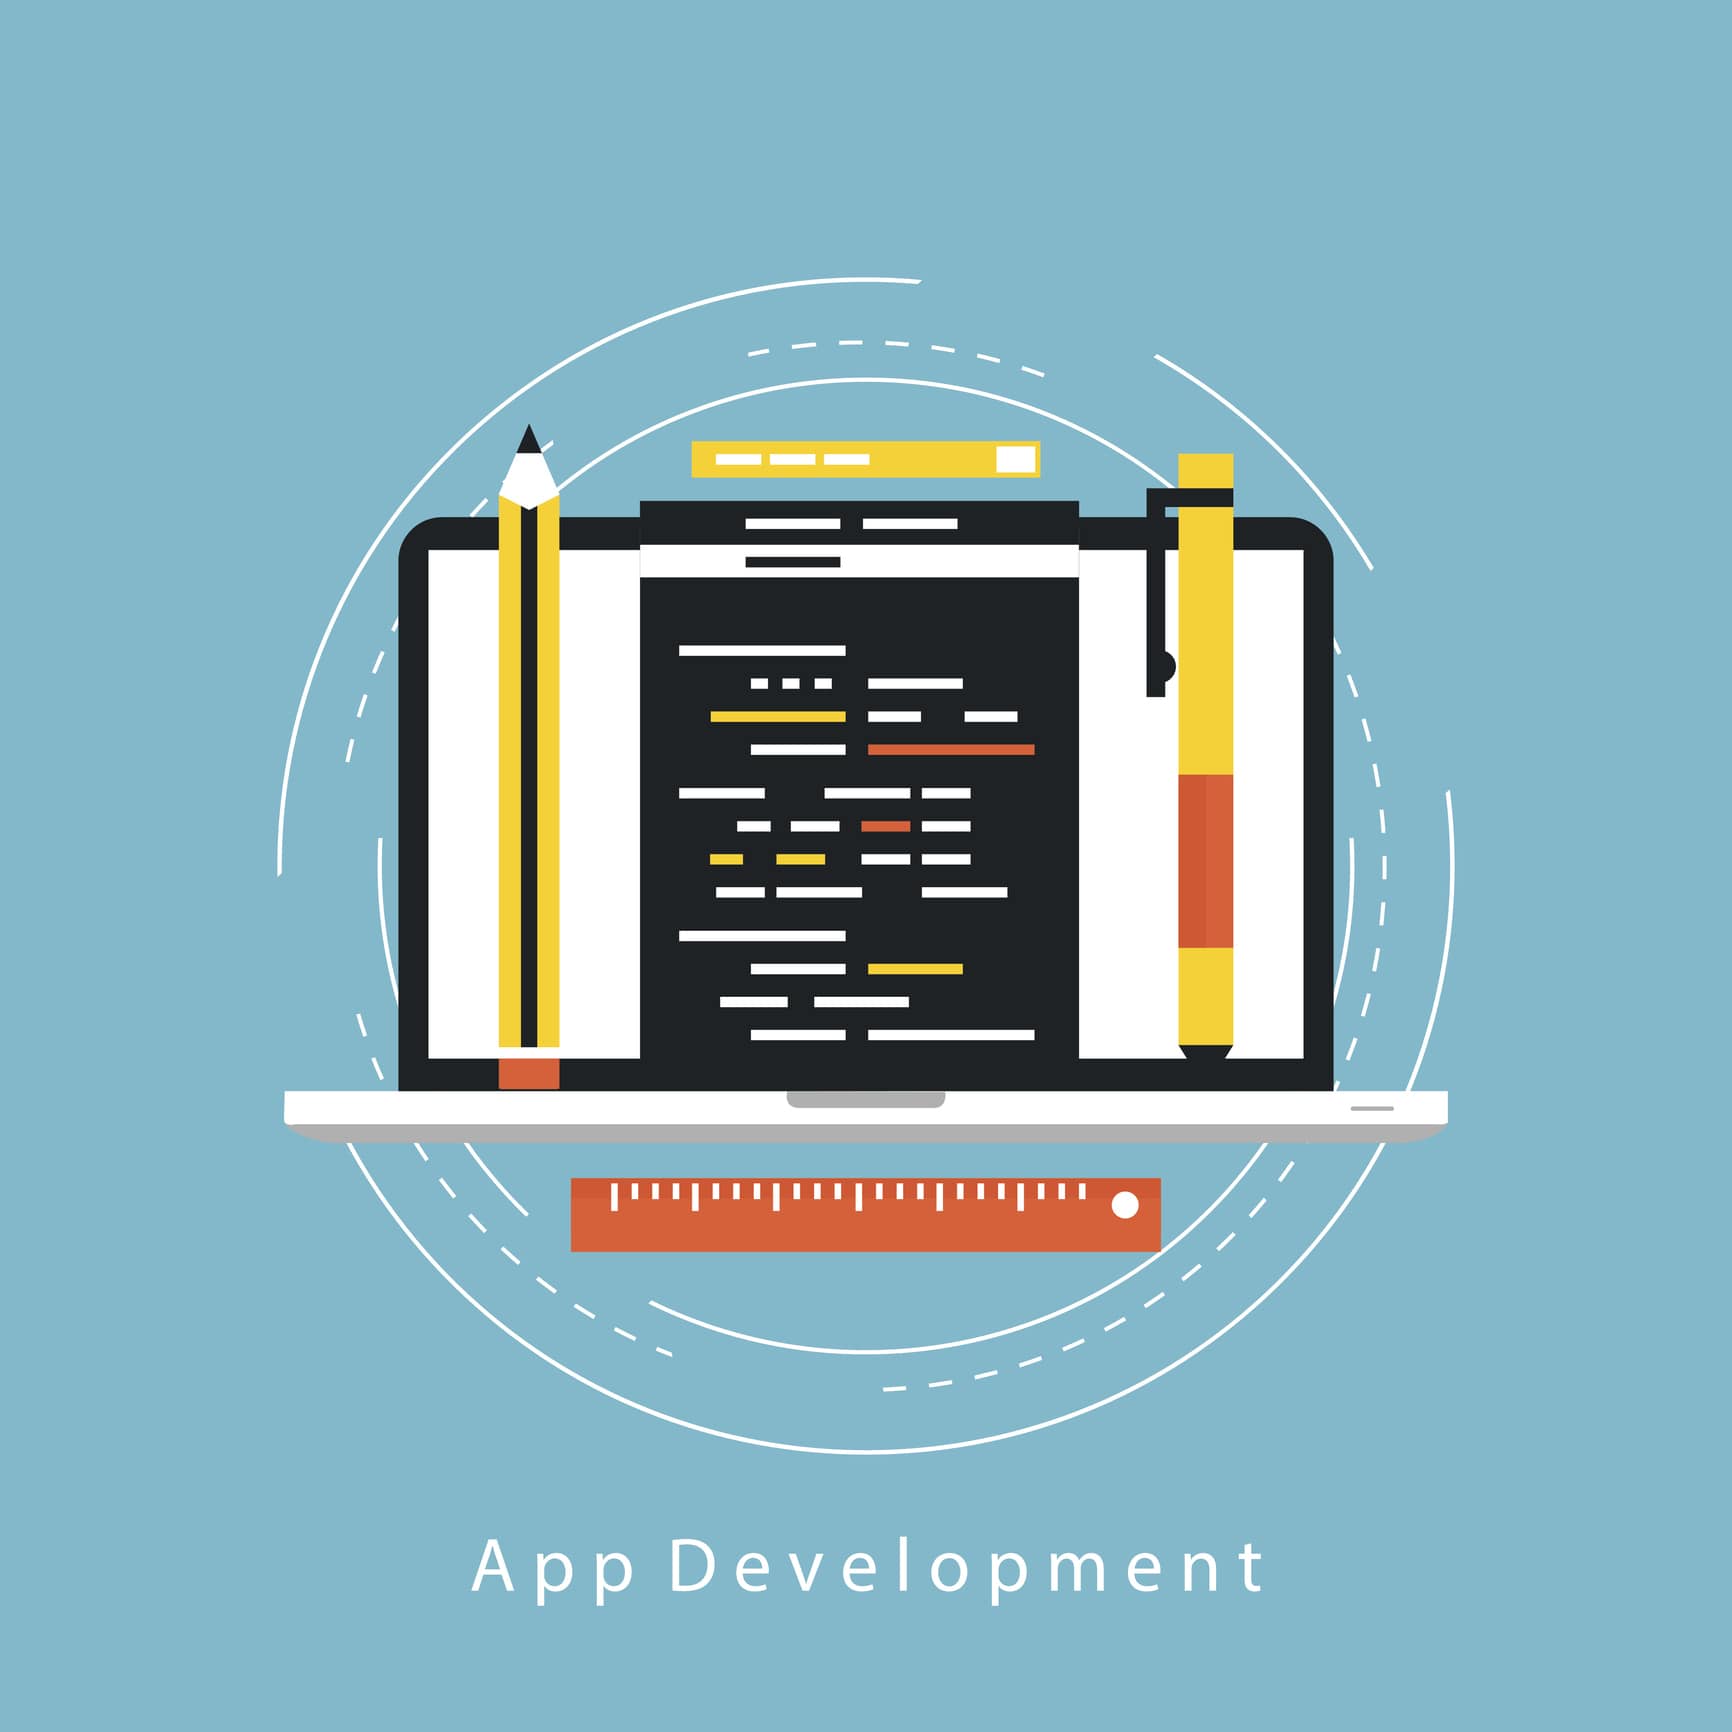 How to Integrate Your OVP Into Your Digital Media Workflow - App Development